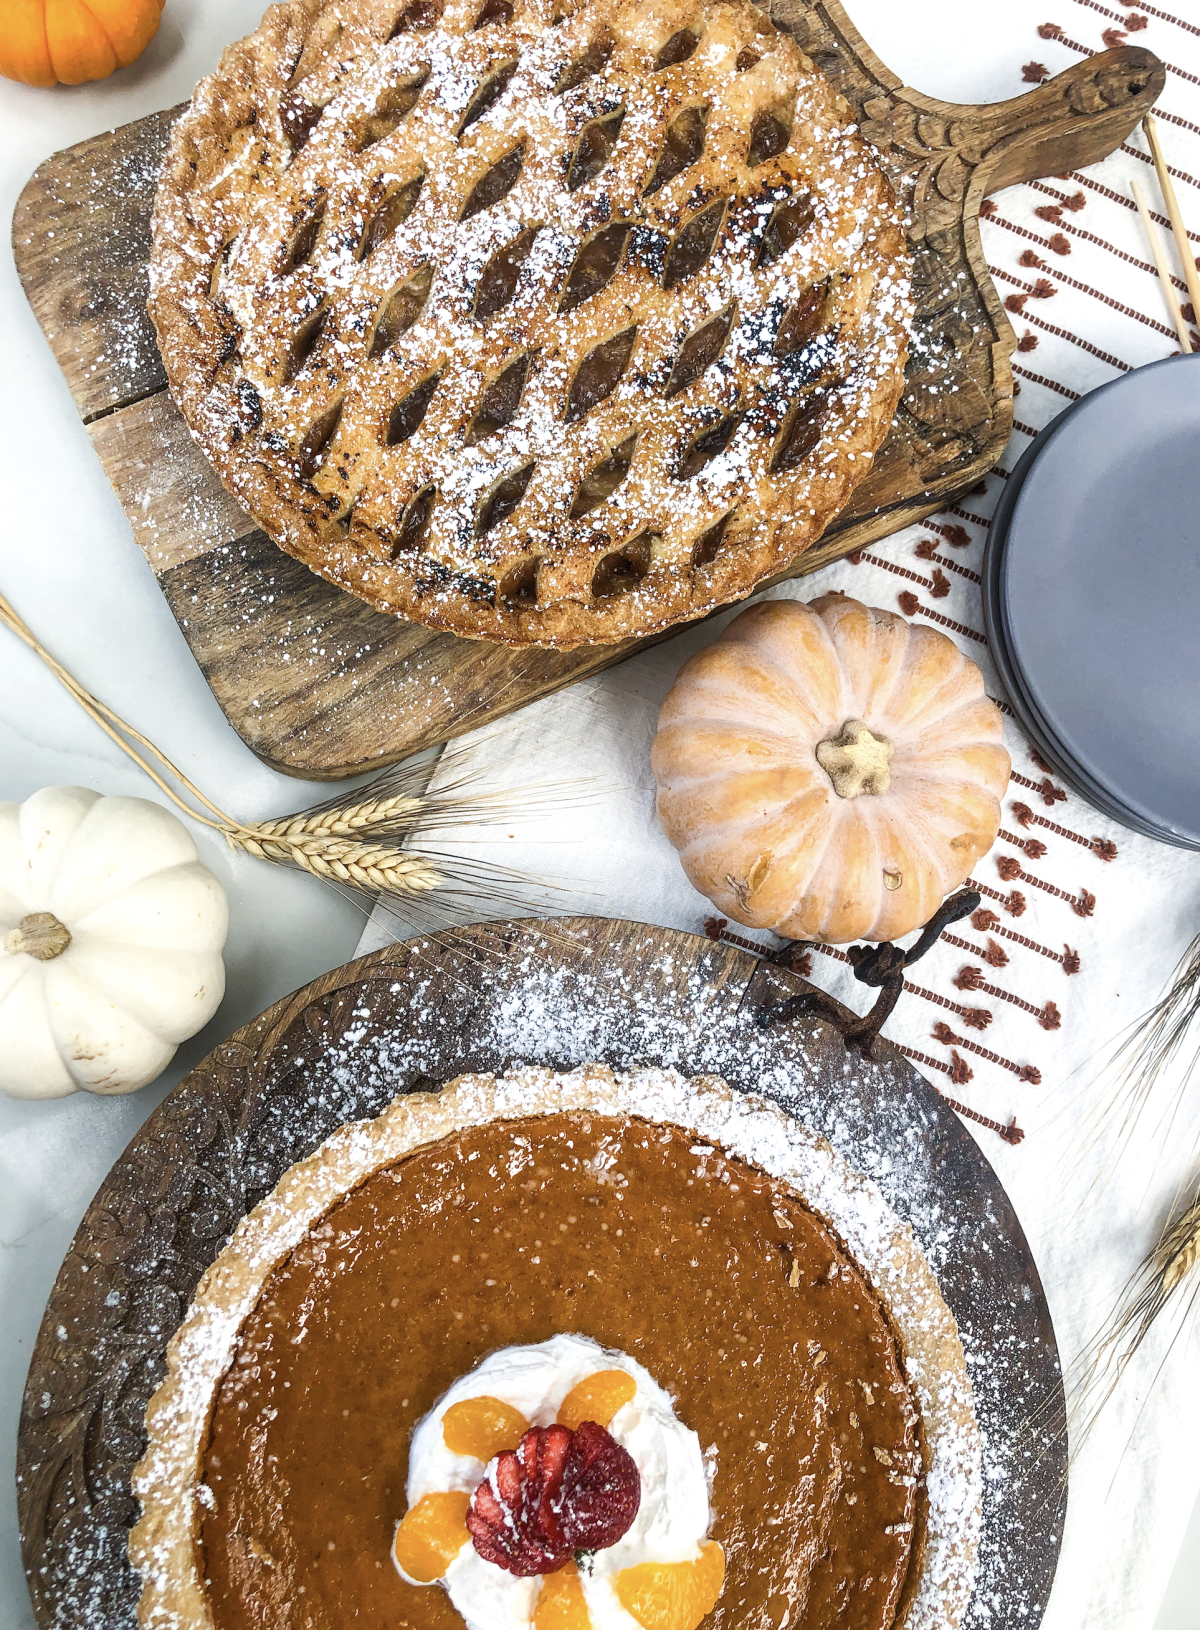 Apple and pumpkin pies from Rusticucina